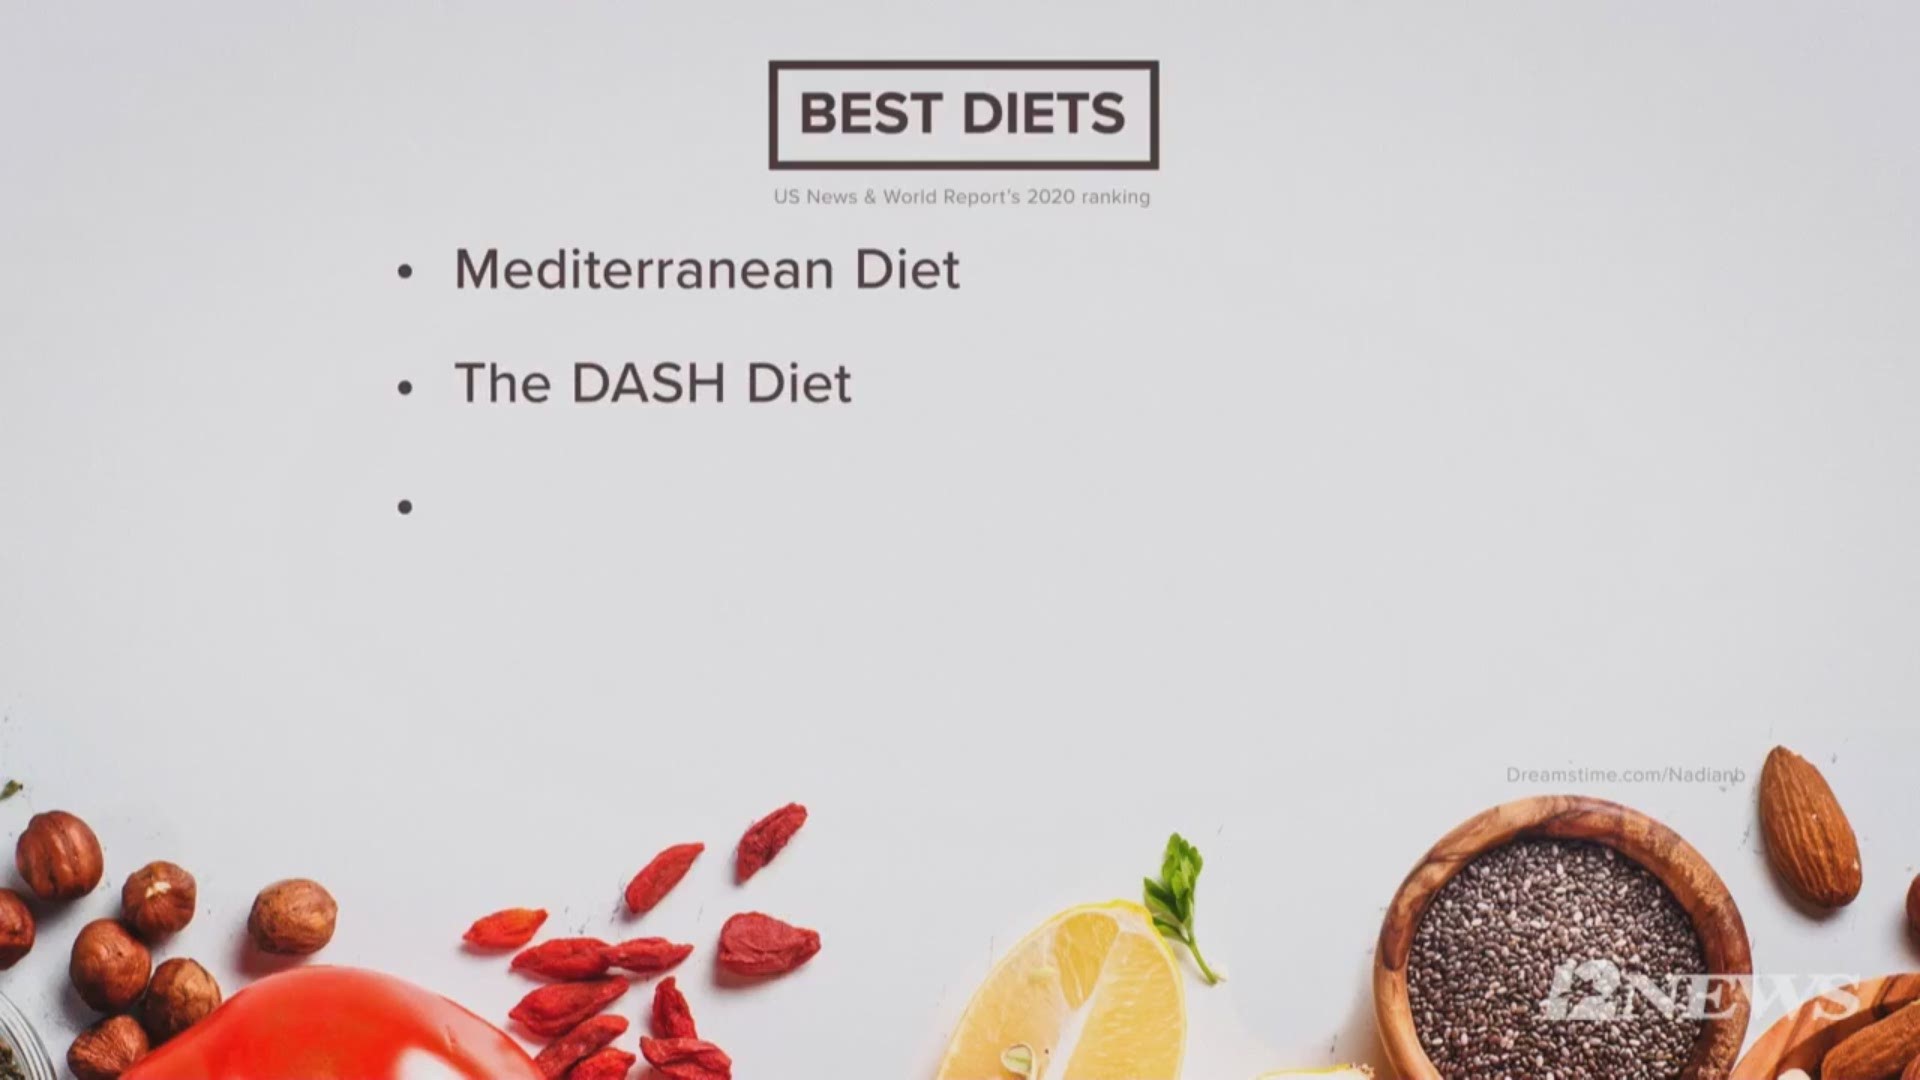 U.S. News and World Reports top diets ranked for the new year